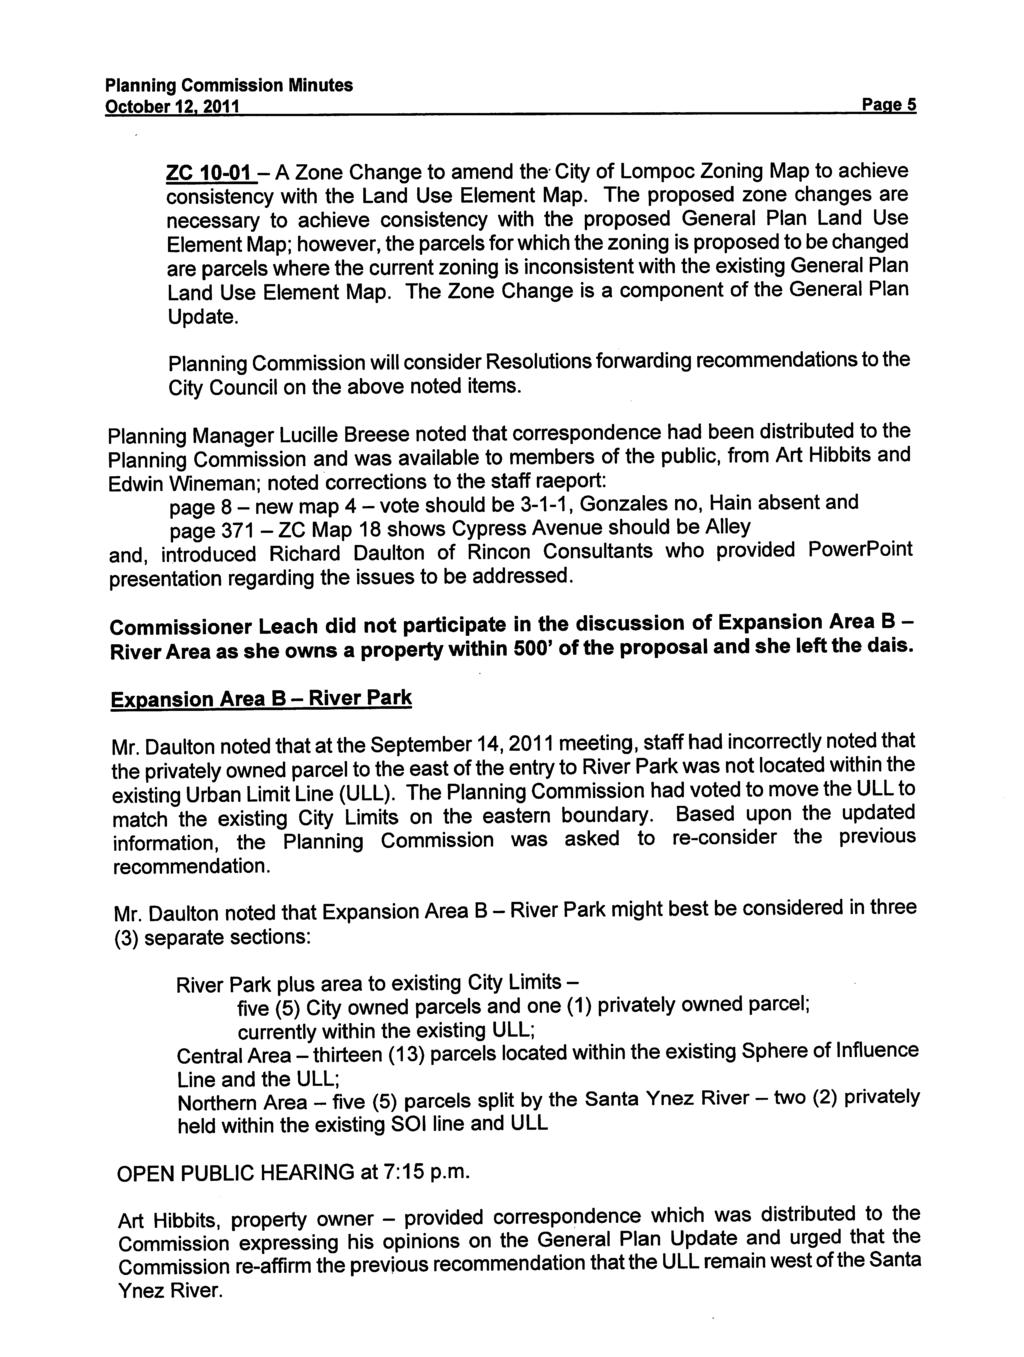 October 12. 2011 Page 5 ZC 10-01 - A Zone Change to amend the City of Lompoc Zoning Map to achieve consistency with the Land Use Element Map.